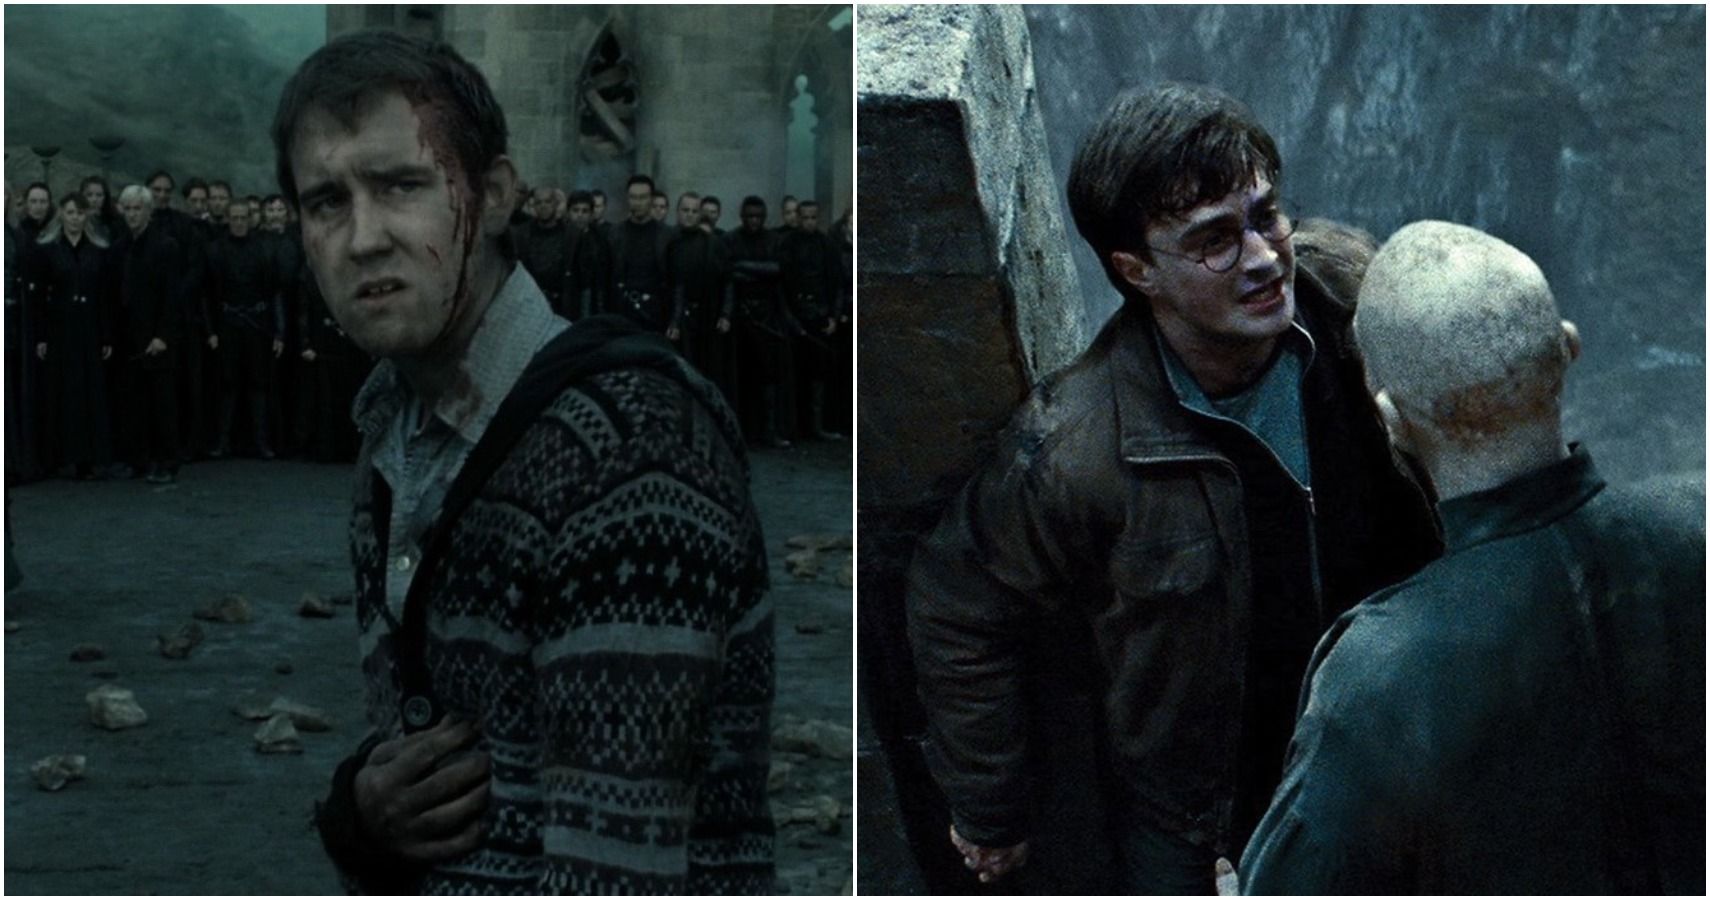 Harry Potter and the Deathly Hallows Part 2 Neville and Harry